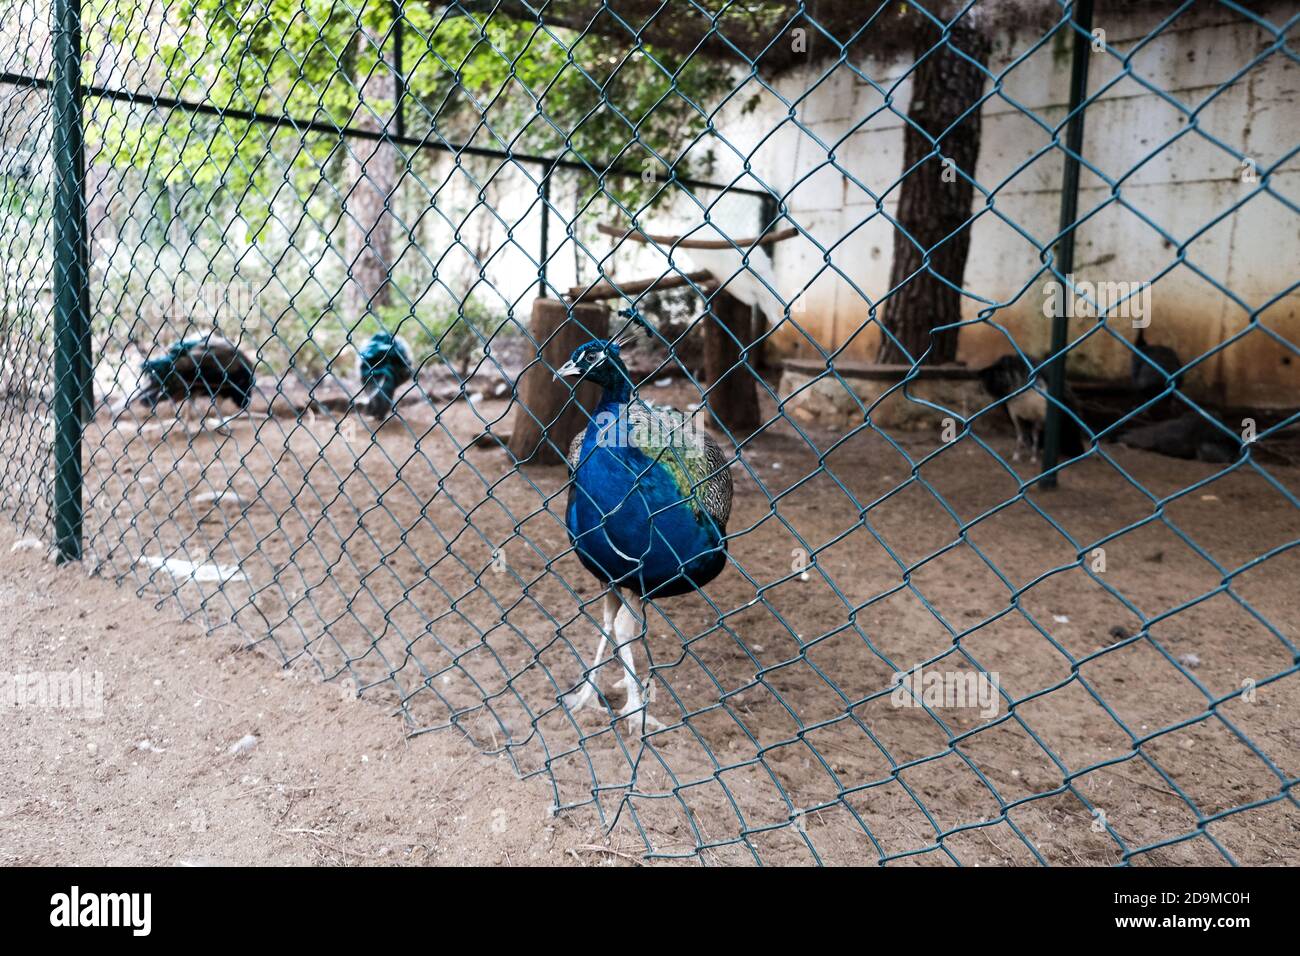 Bright blue peacock walking in a zoo behind the fence. Wild birds in captivity for tourist entertainment. Beautiful colorful peacock held captive Stock Photo